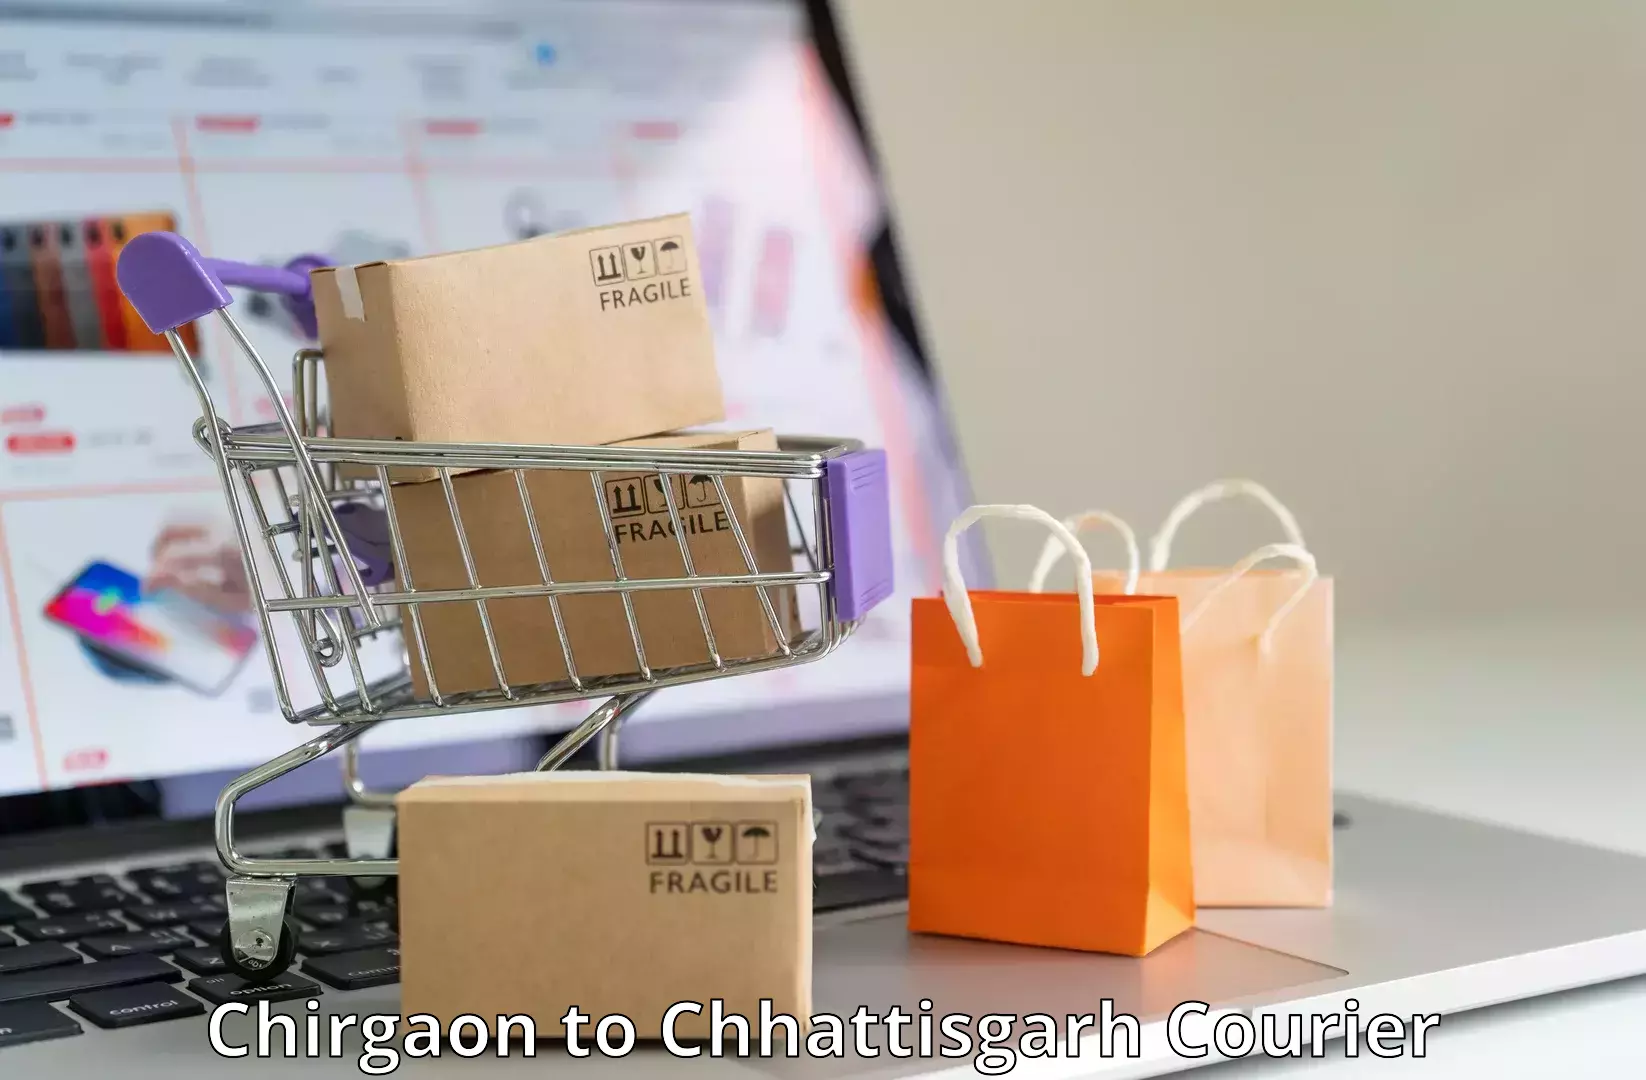 Easy access courier services Chirgaon to Patna Chhattisgarh